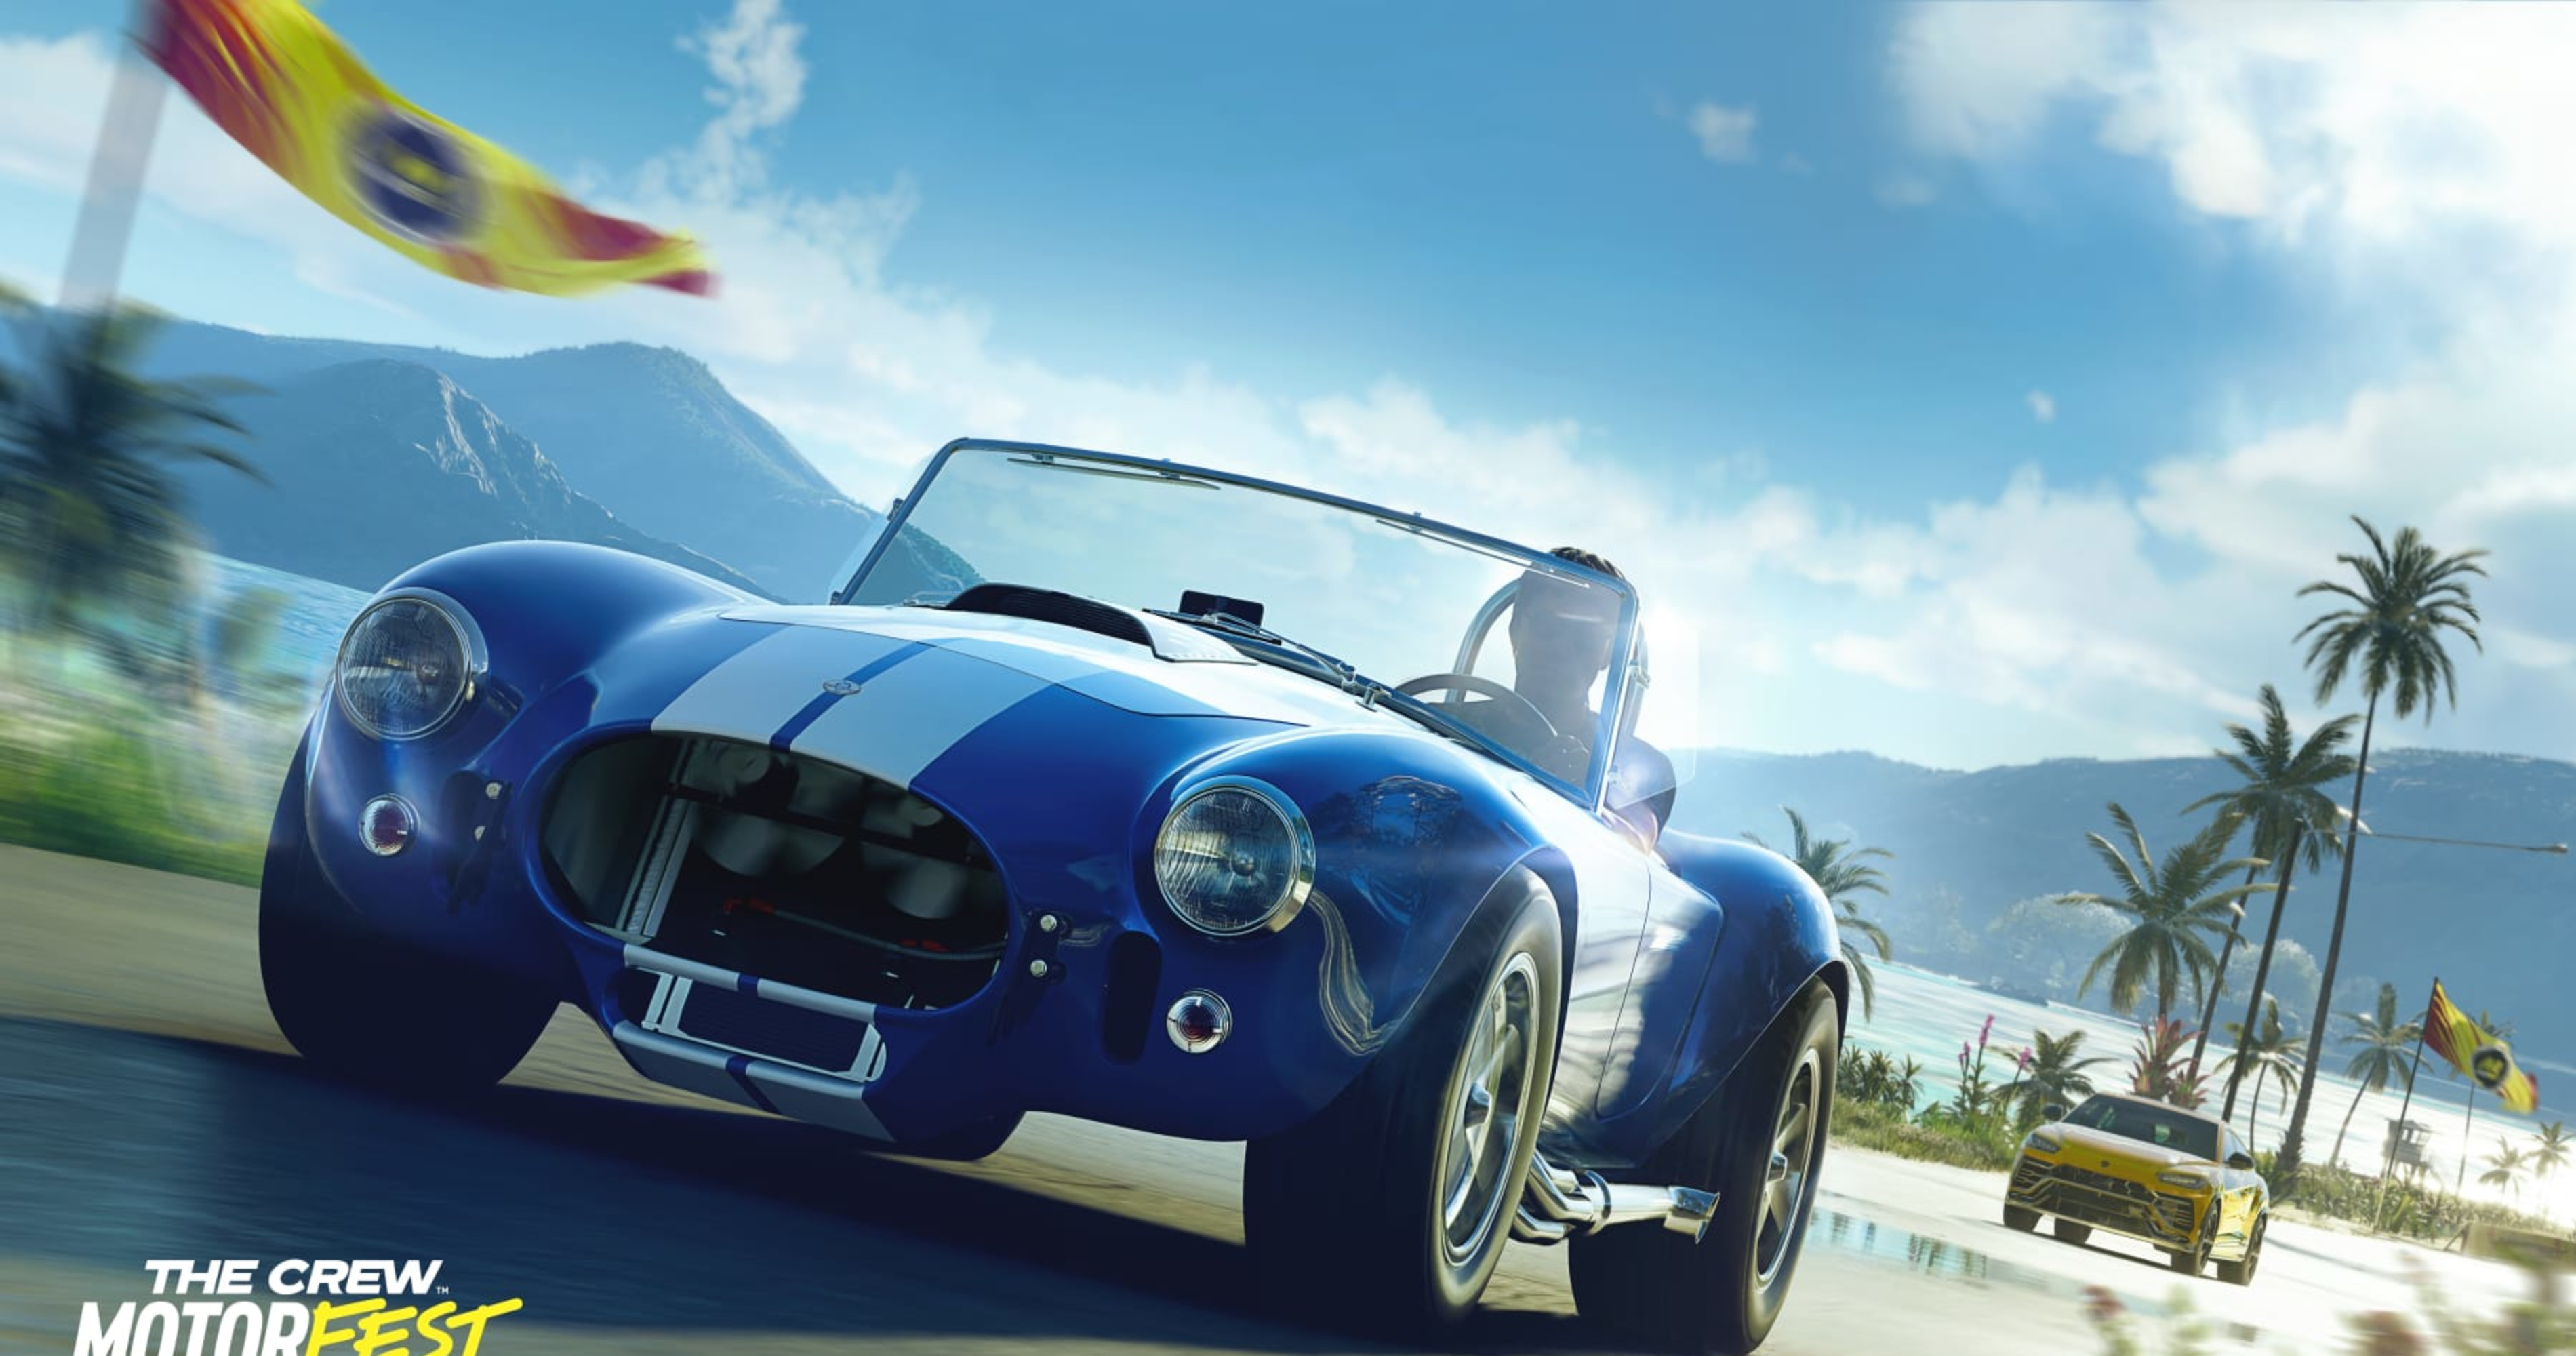 The Crew Motorfest Review: Gameplay Videos, Impressions, Features and Modes